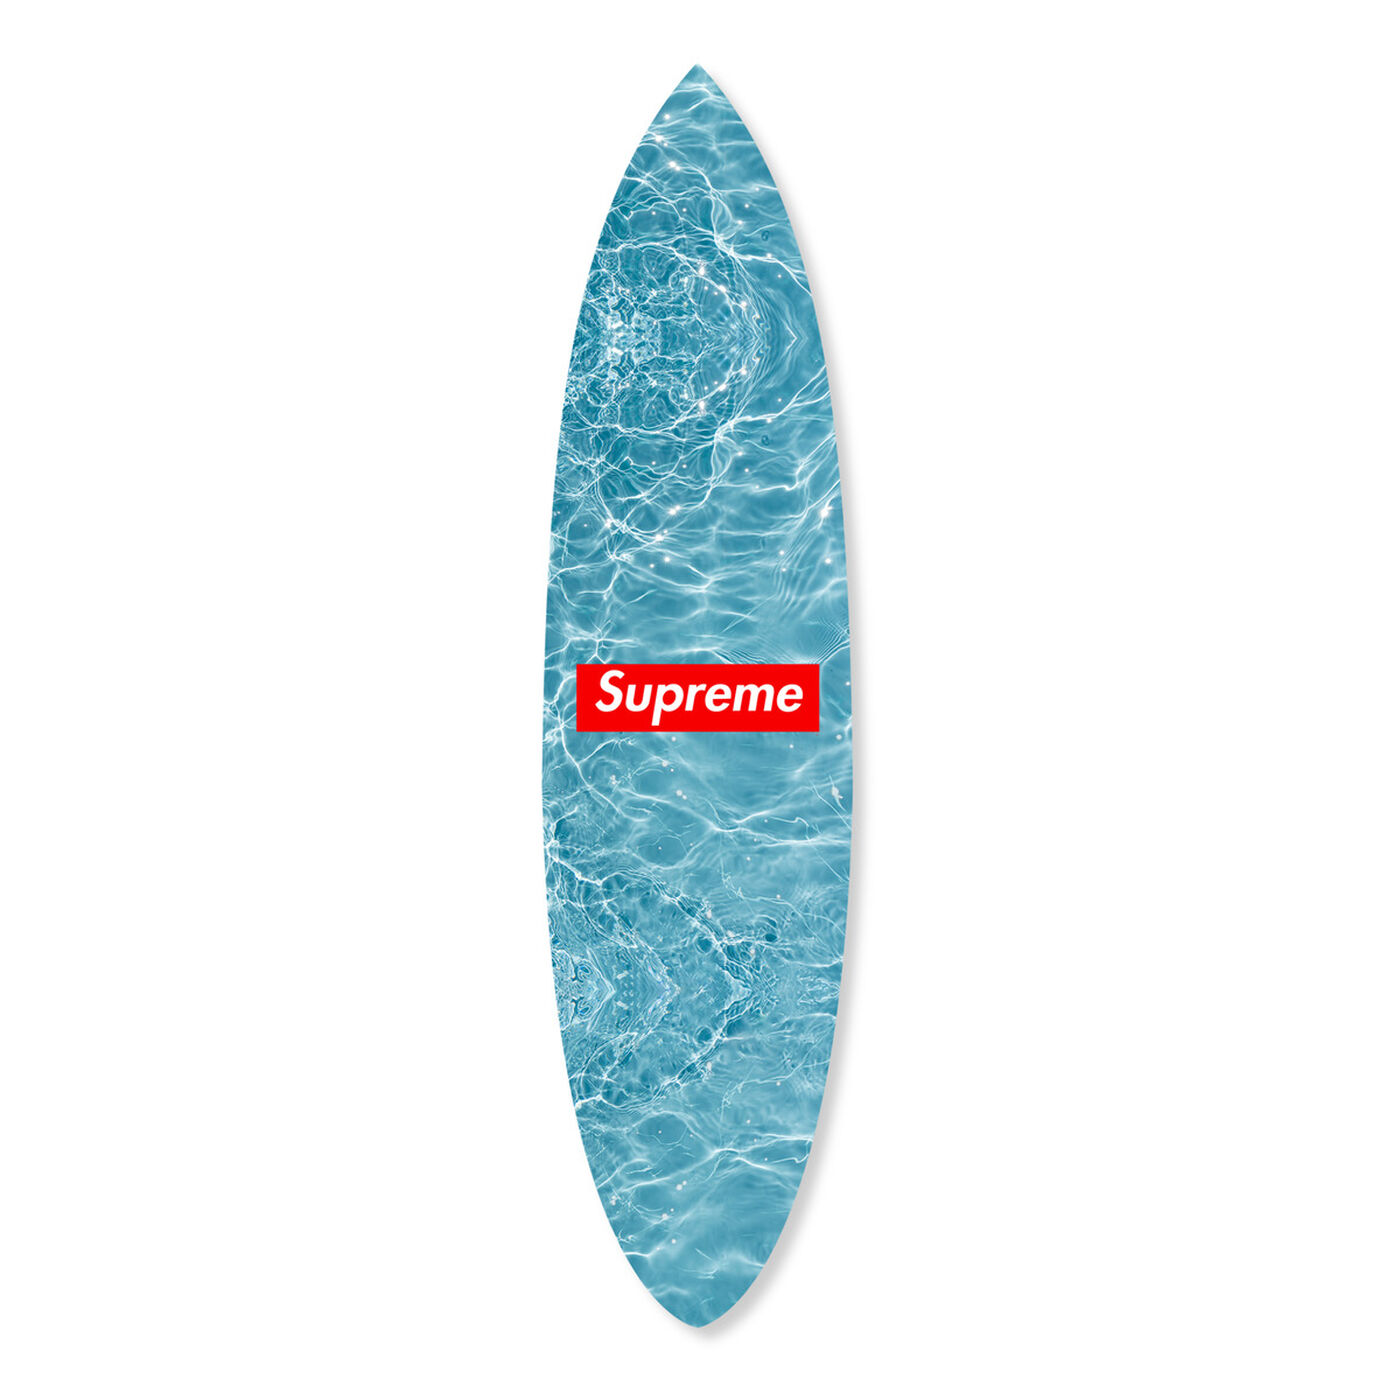 Order of Red Surfboard